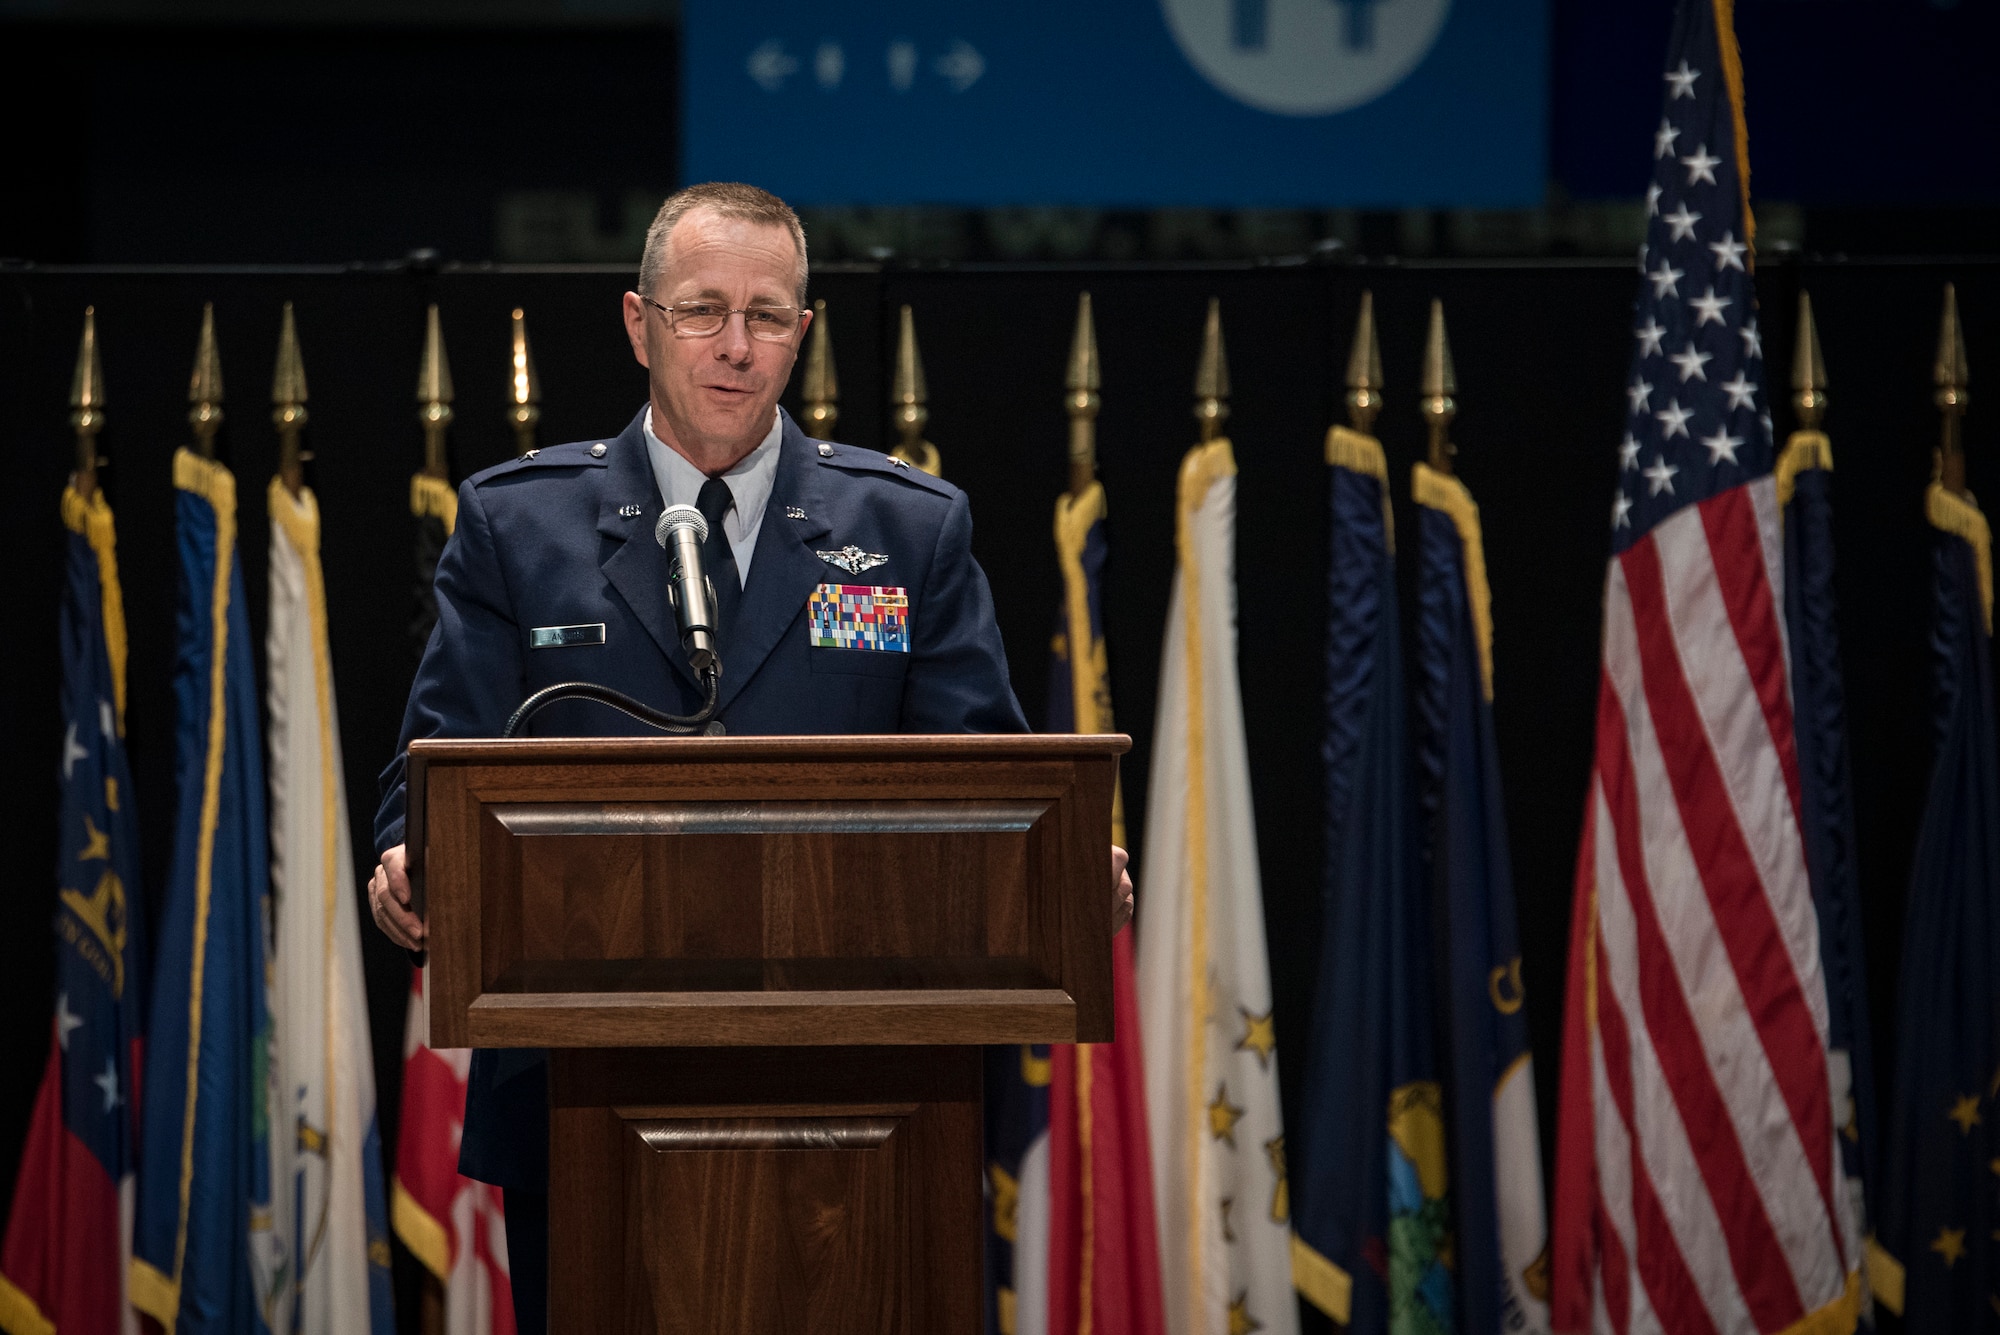 Brig. Gen. (Dr.) John Andrus speaks at his assumption of command ceremony July 19, 2021, at the National Museum of the U.S. Air Force. Andrus assumed command of the 711th Human Performance Wing, part of the Air Force Research Laboratory. (U.S. Air Force photo by Richard Eldridge)